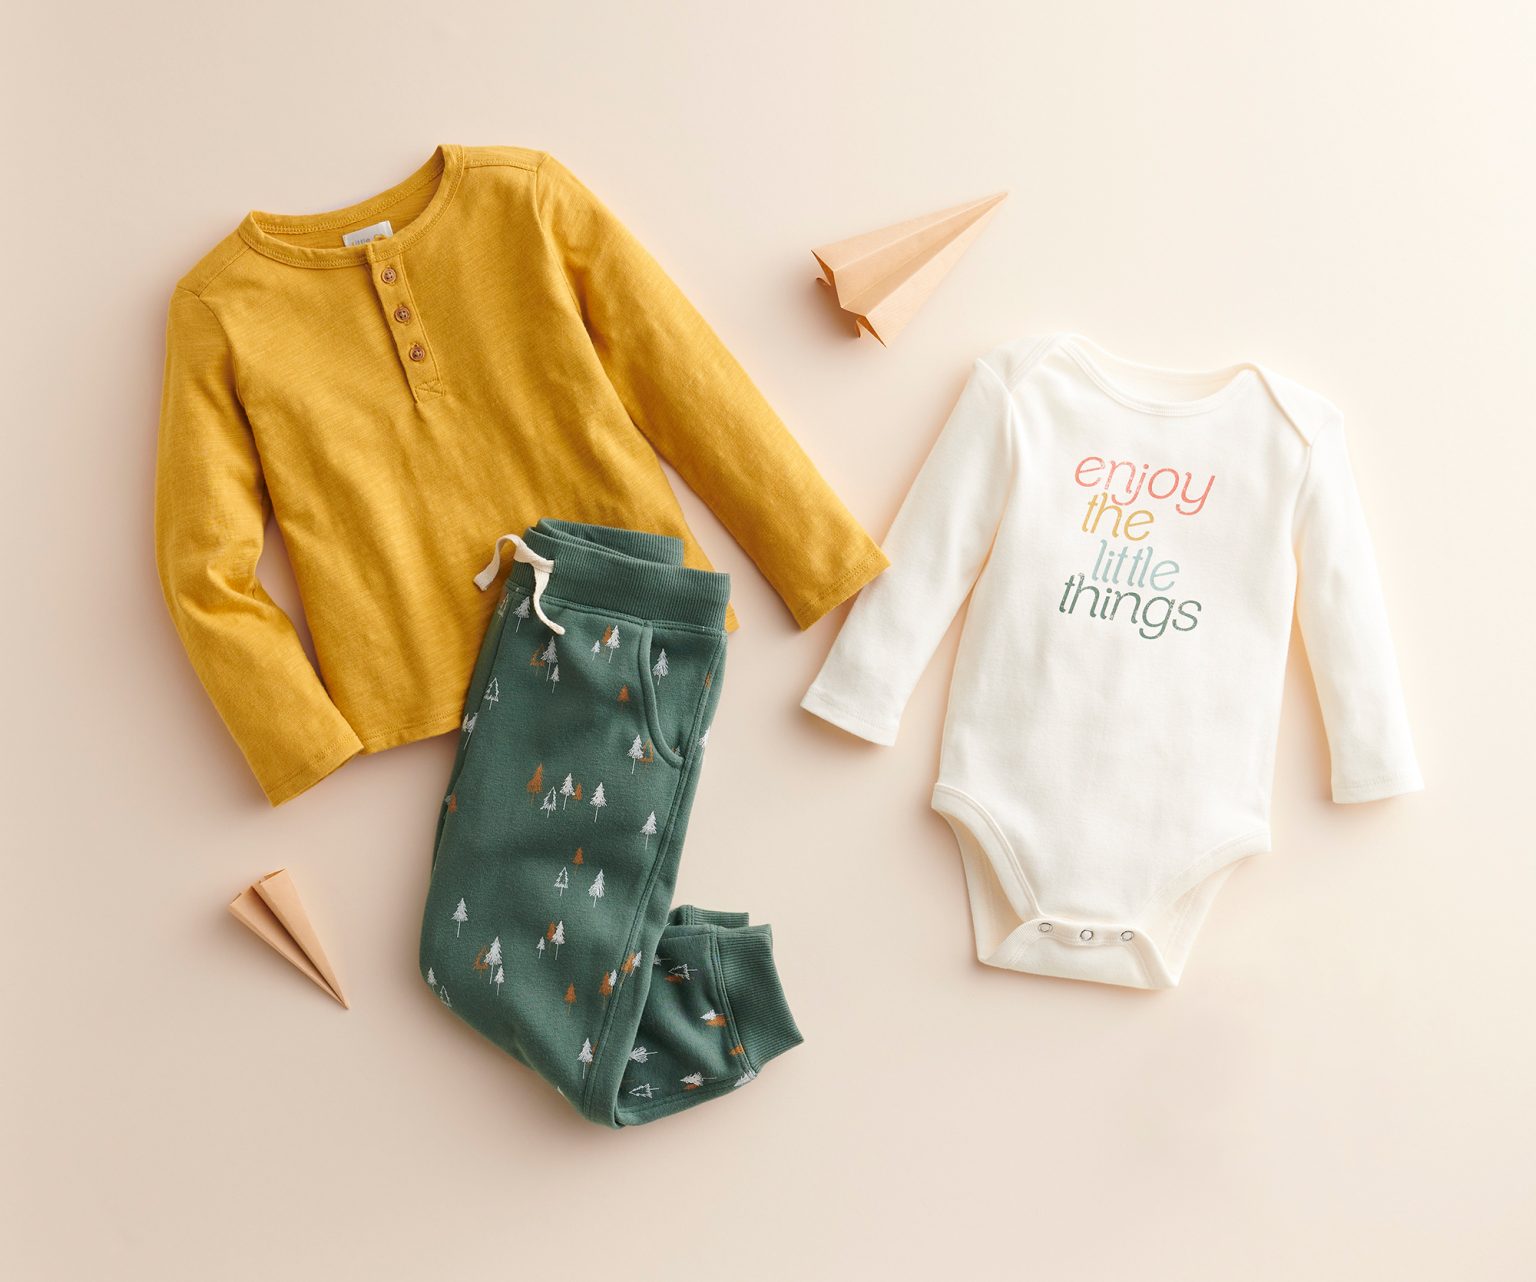 My Fall Little Co. Kids Collection is Here - Lauren Conrad